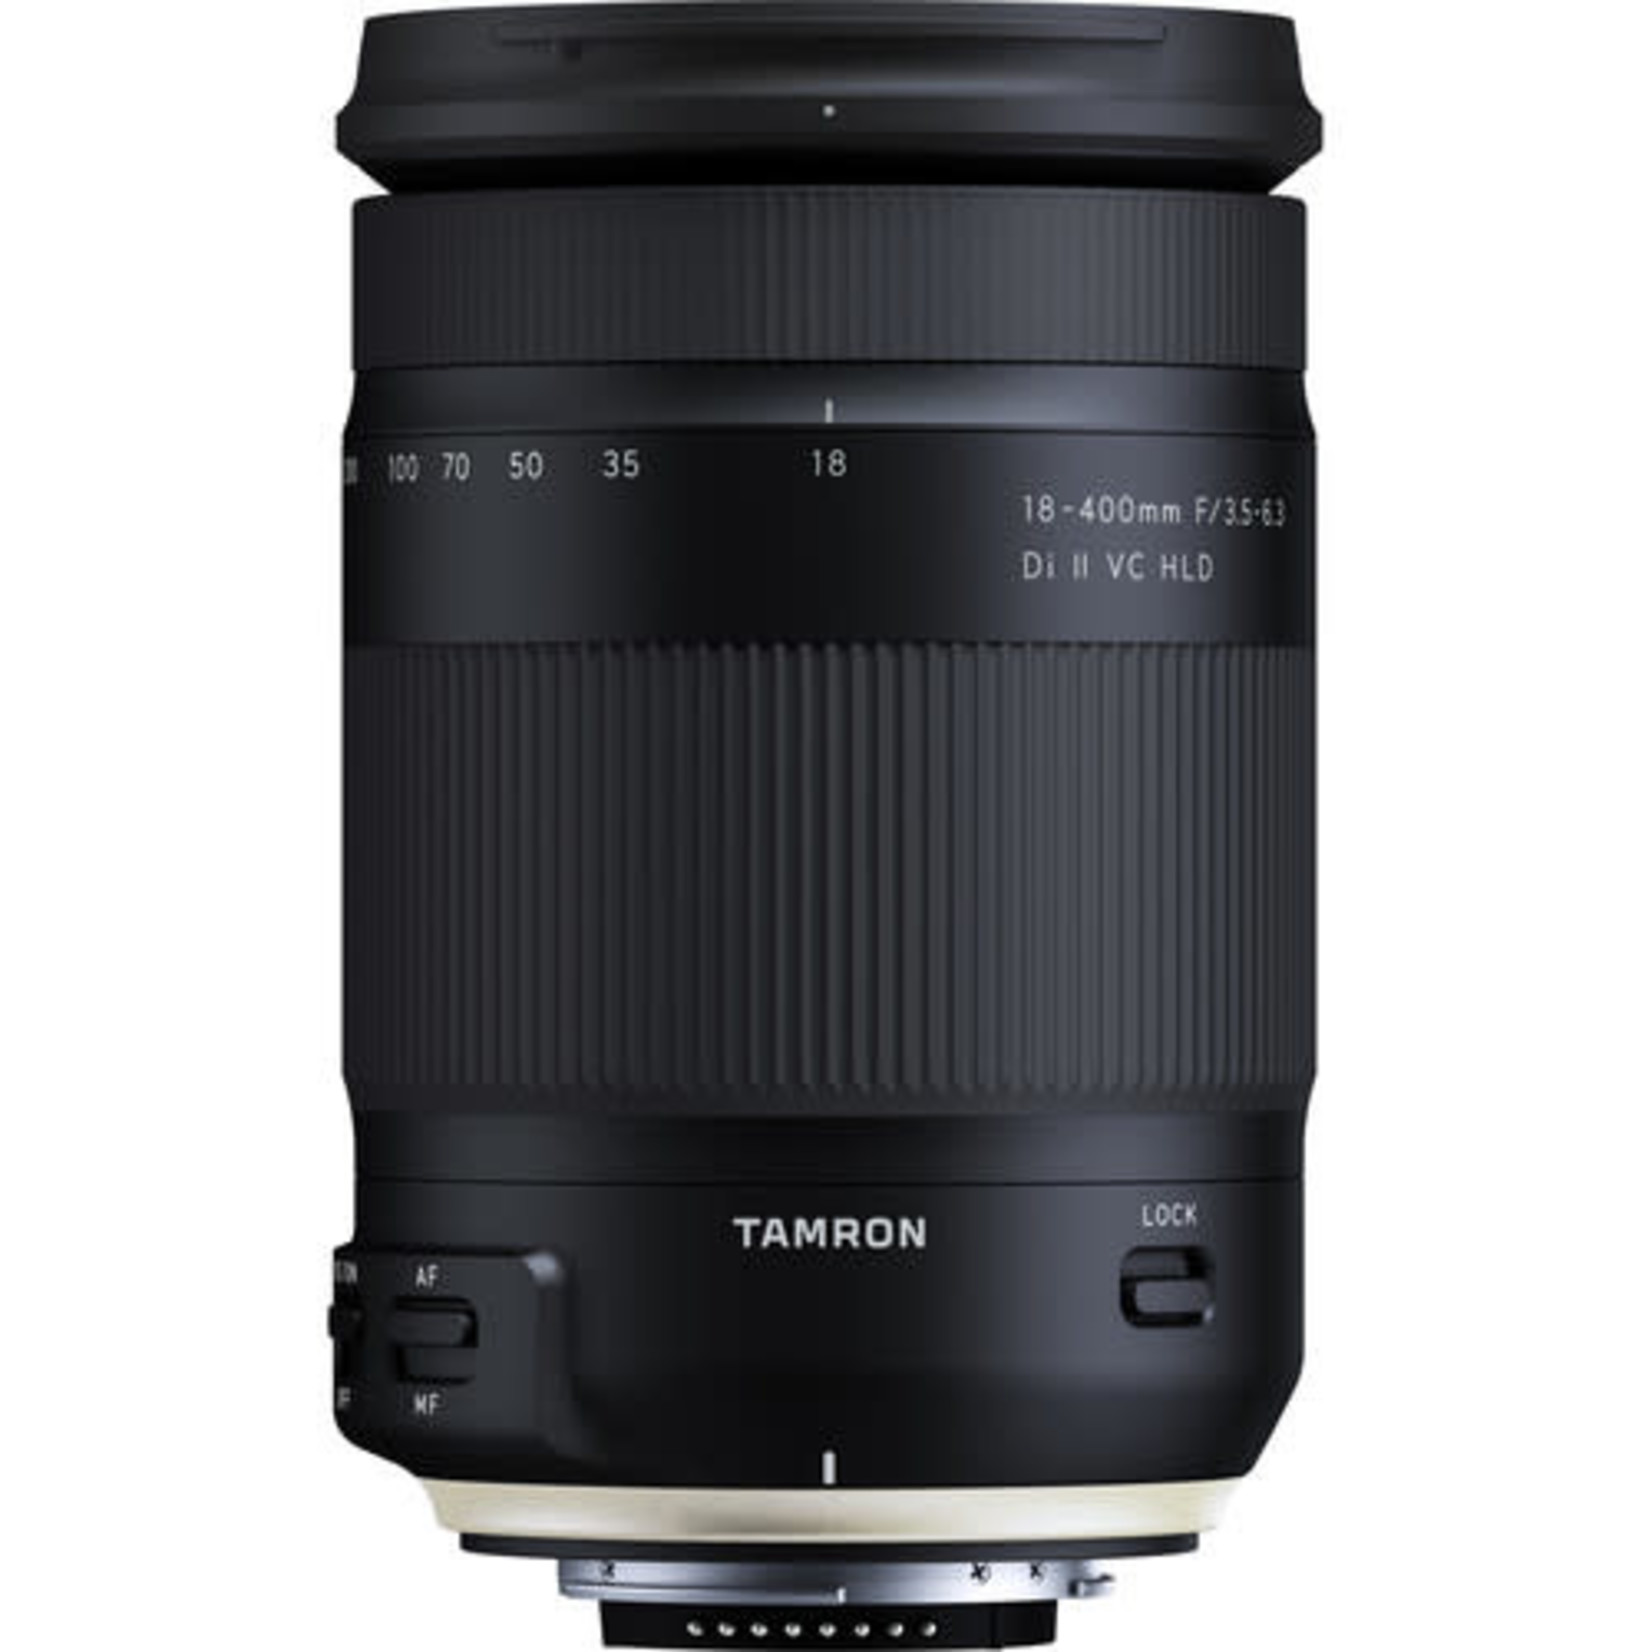 Tamron Tamron 18-400mm f/3.5-6.3 Di II VC HLD Lens for Canon EF